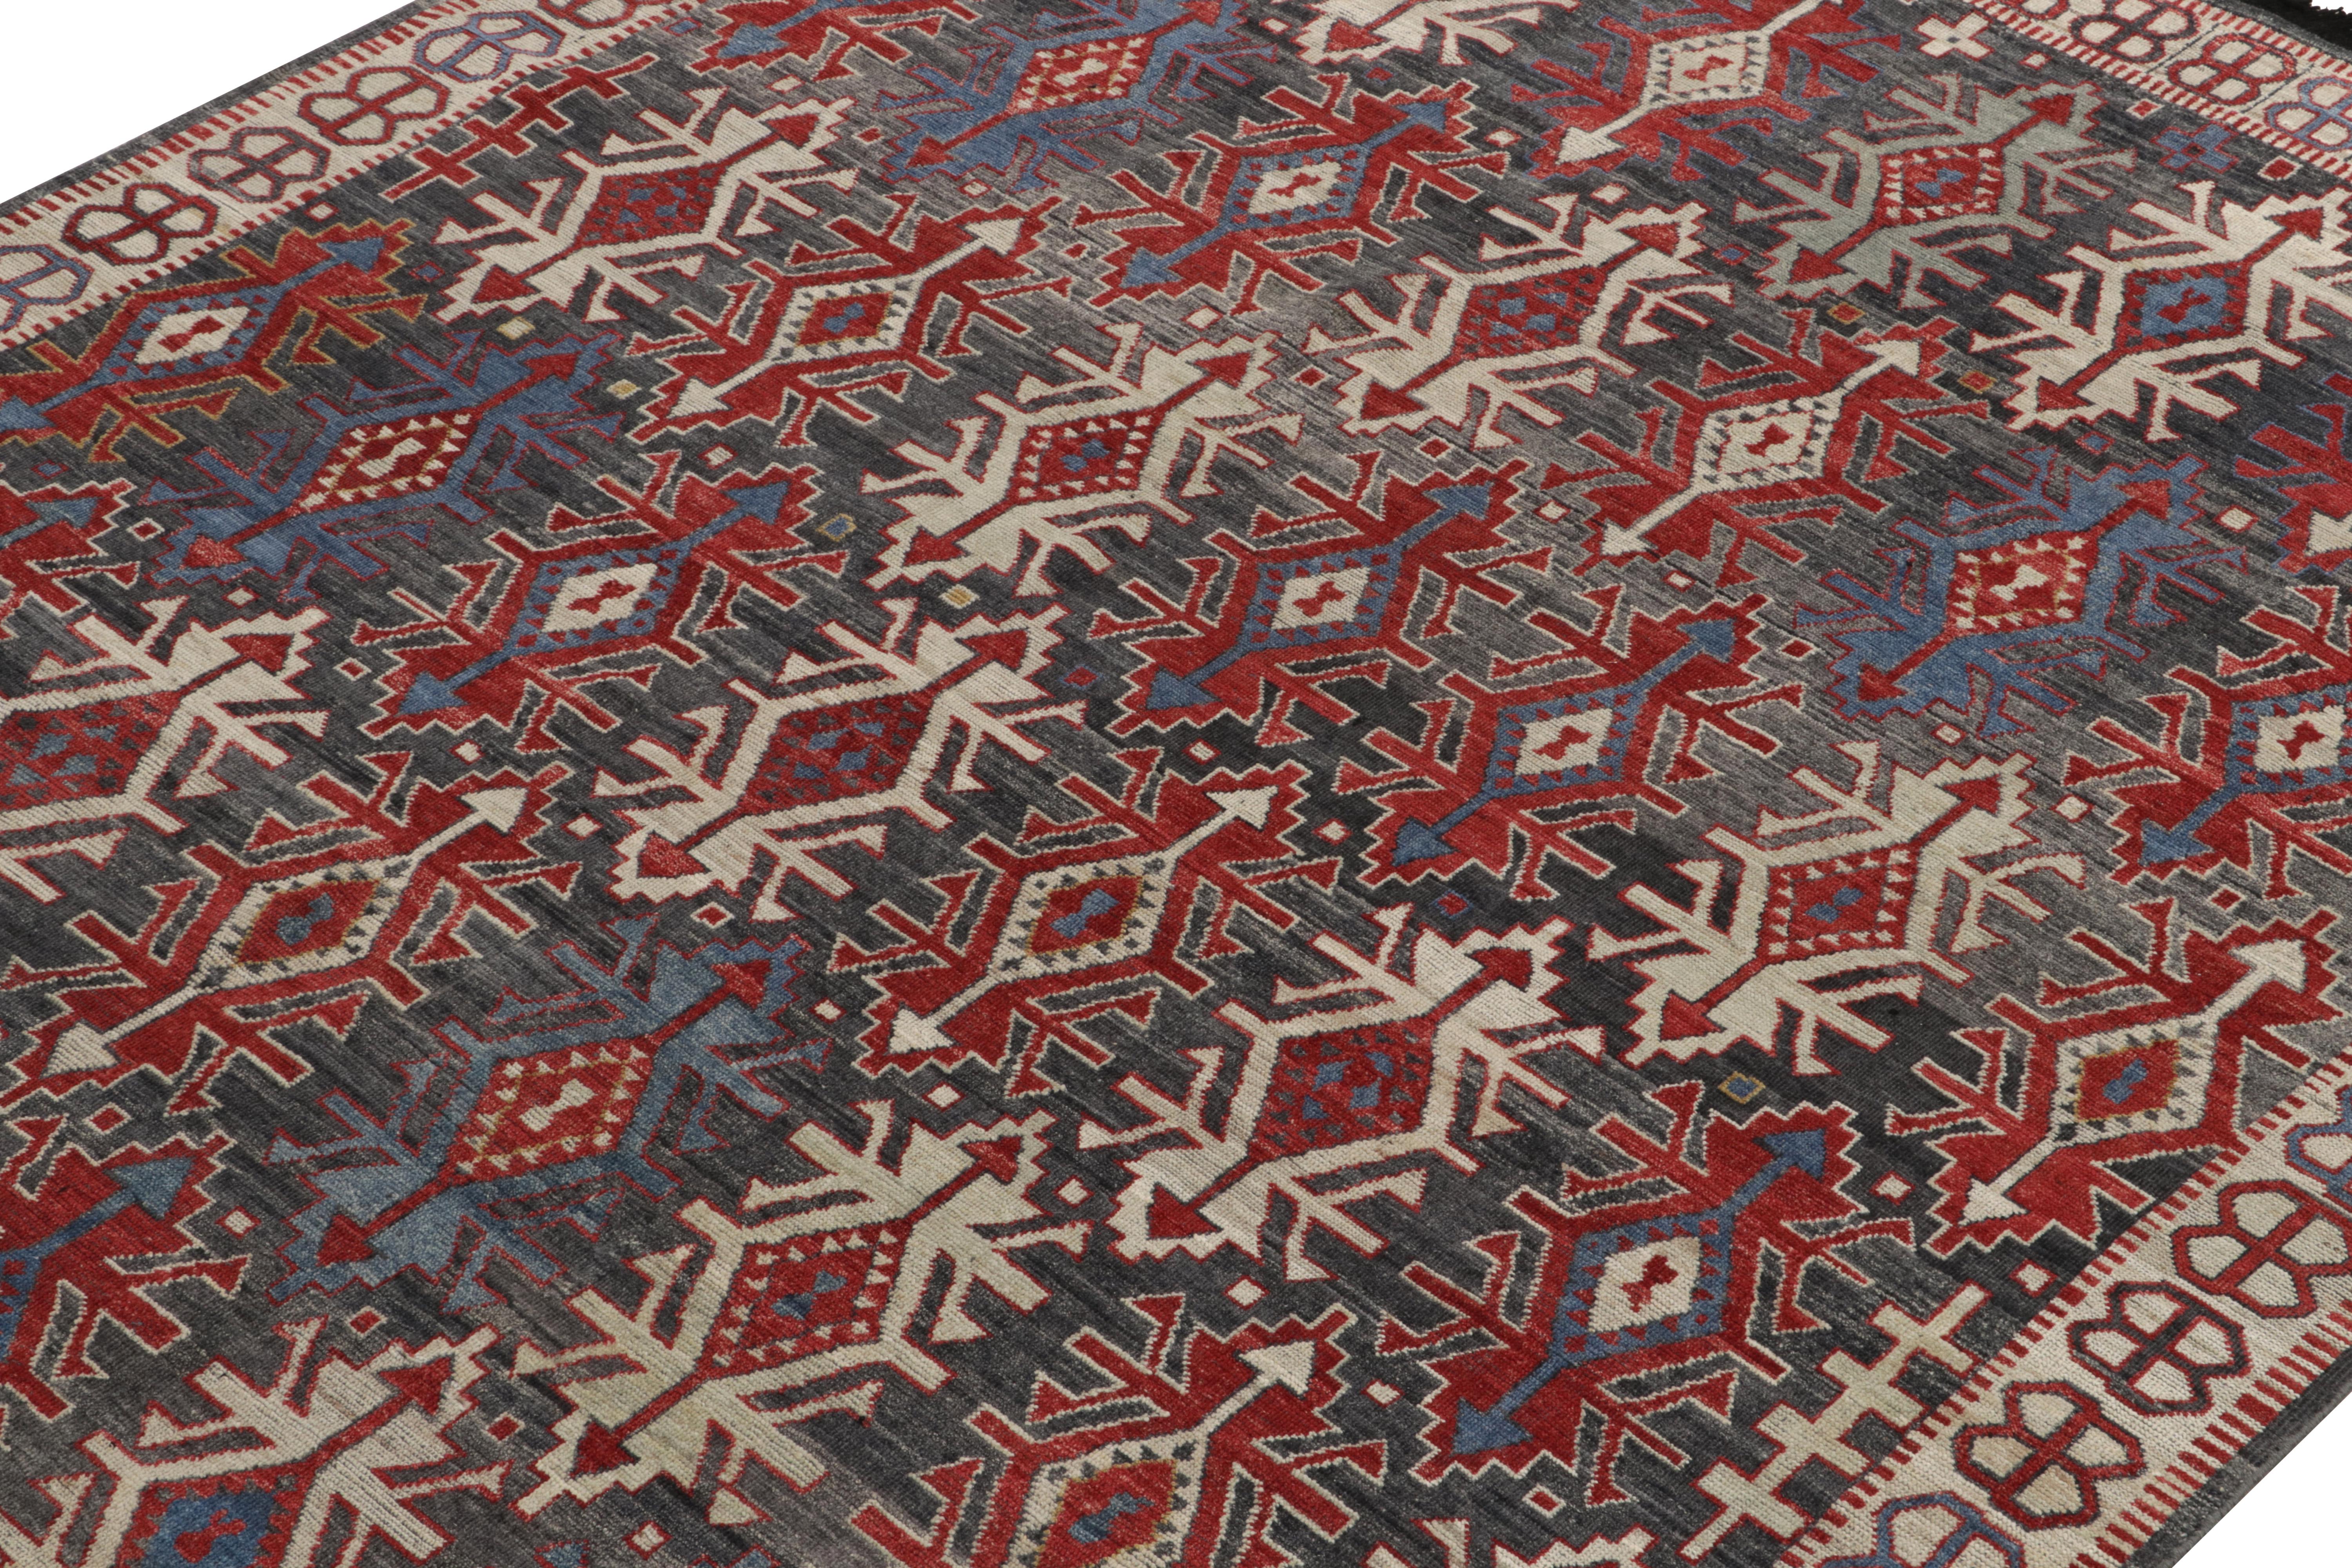 Indian Rug & Kilim's Caucasian Style rug in Gray, Red & Blue Geometric Pattern For Sale